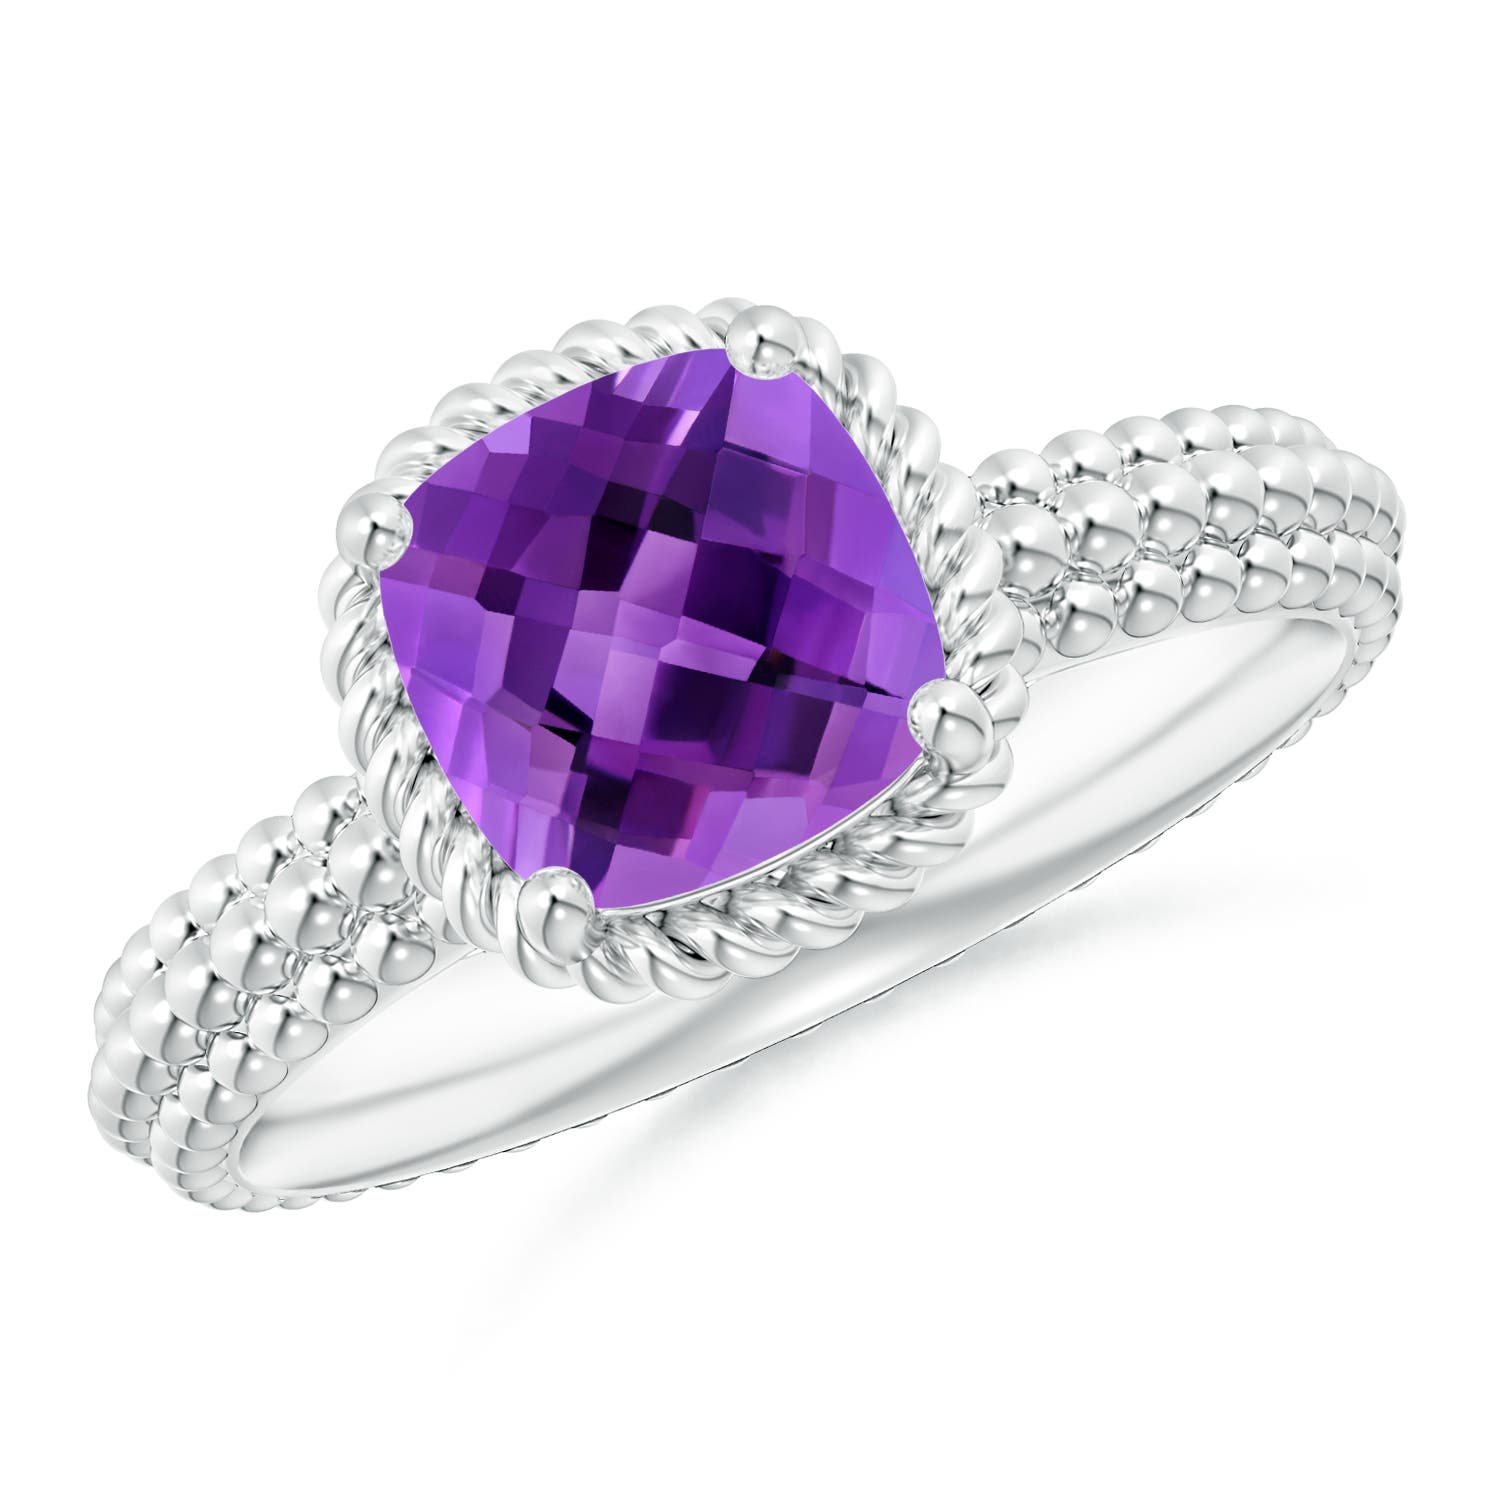 AAA - Amethyst / 1.35 CT / 14 KT White Gold